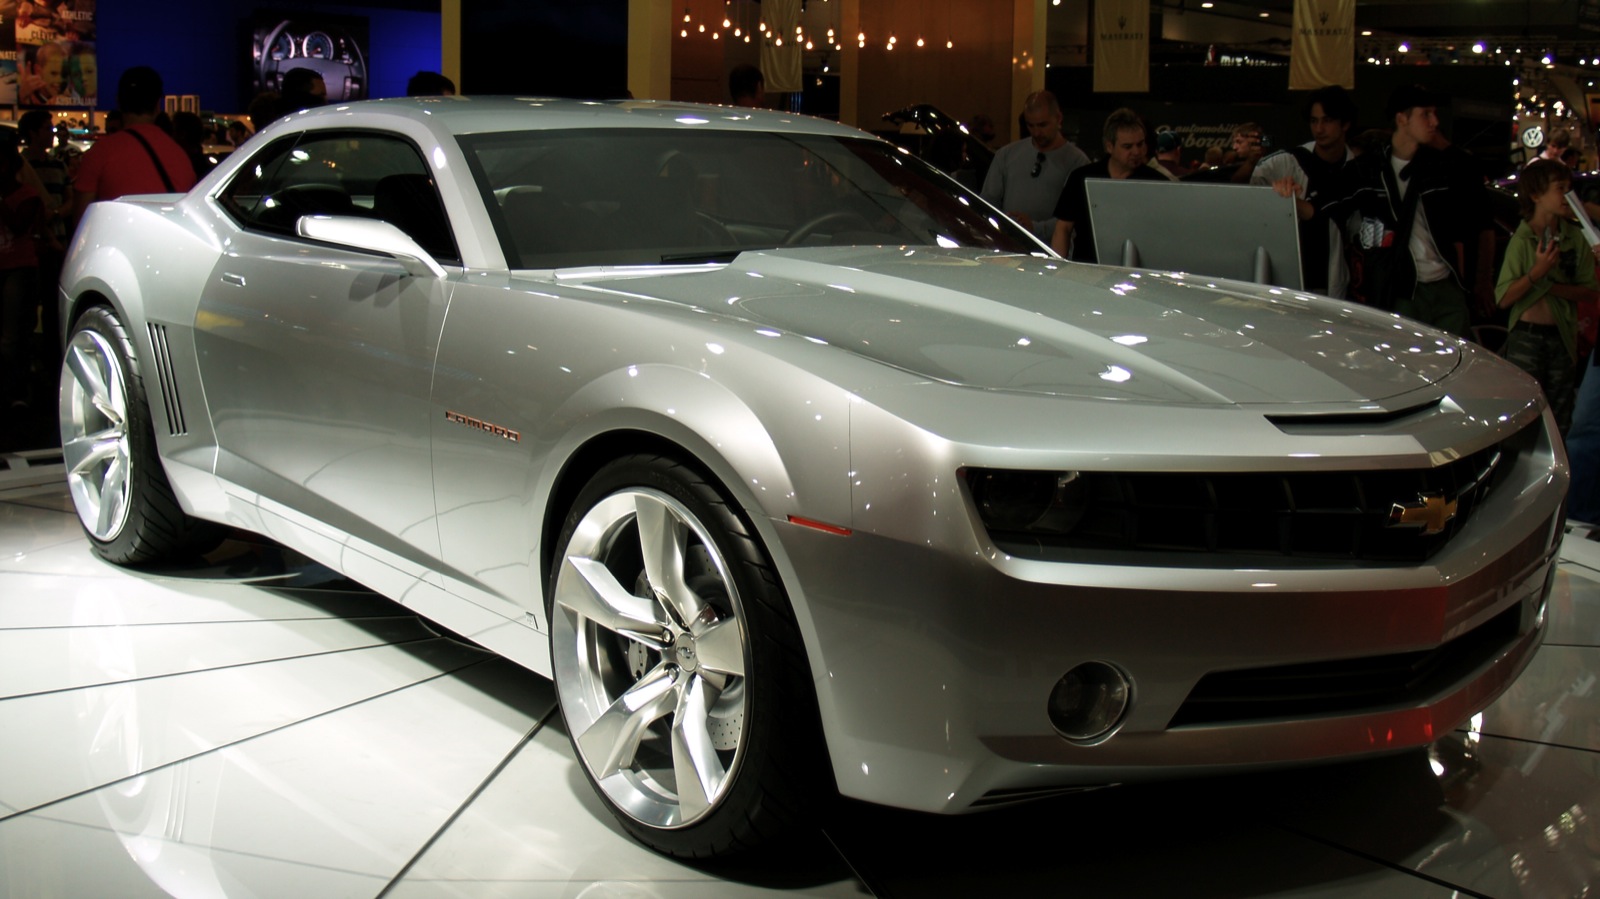 there is a silver chevrolet camaro on display at this event